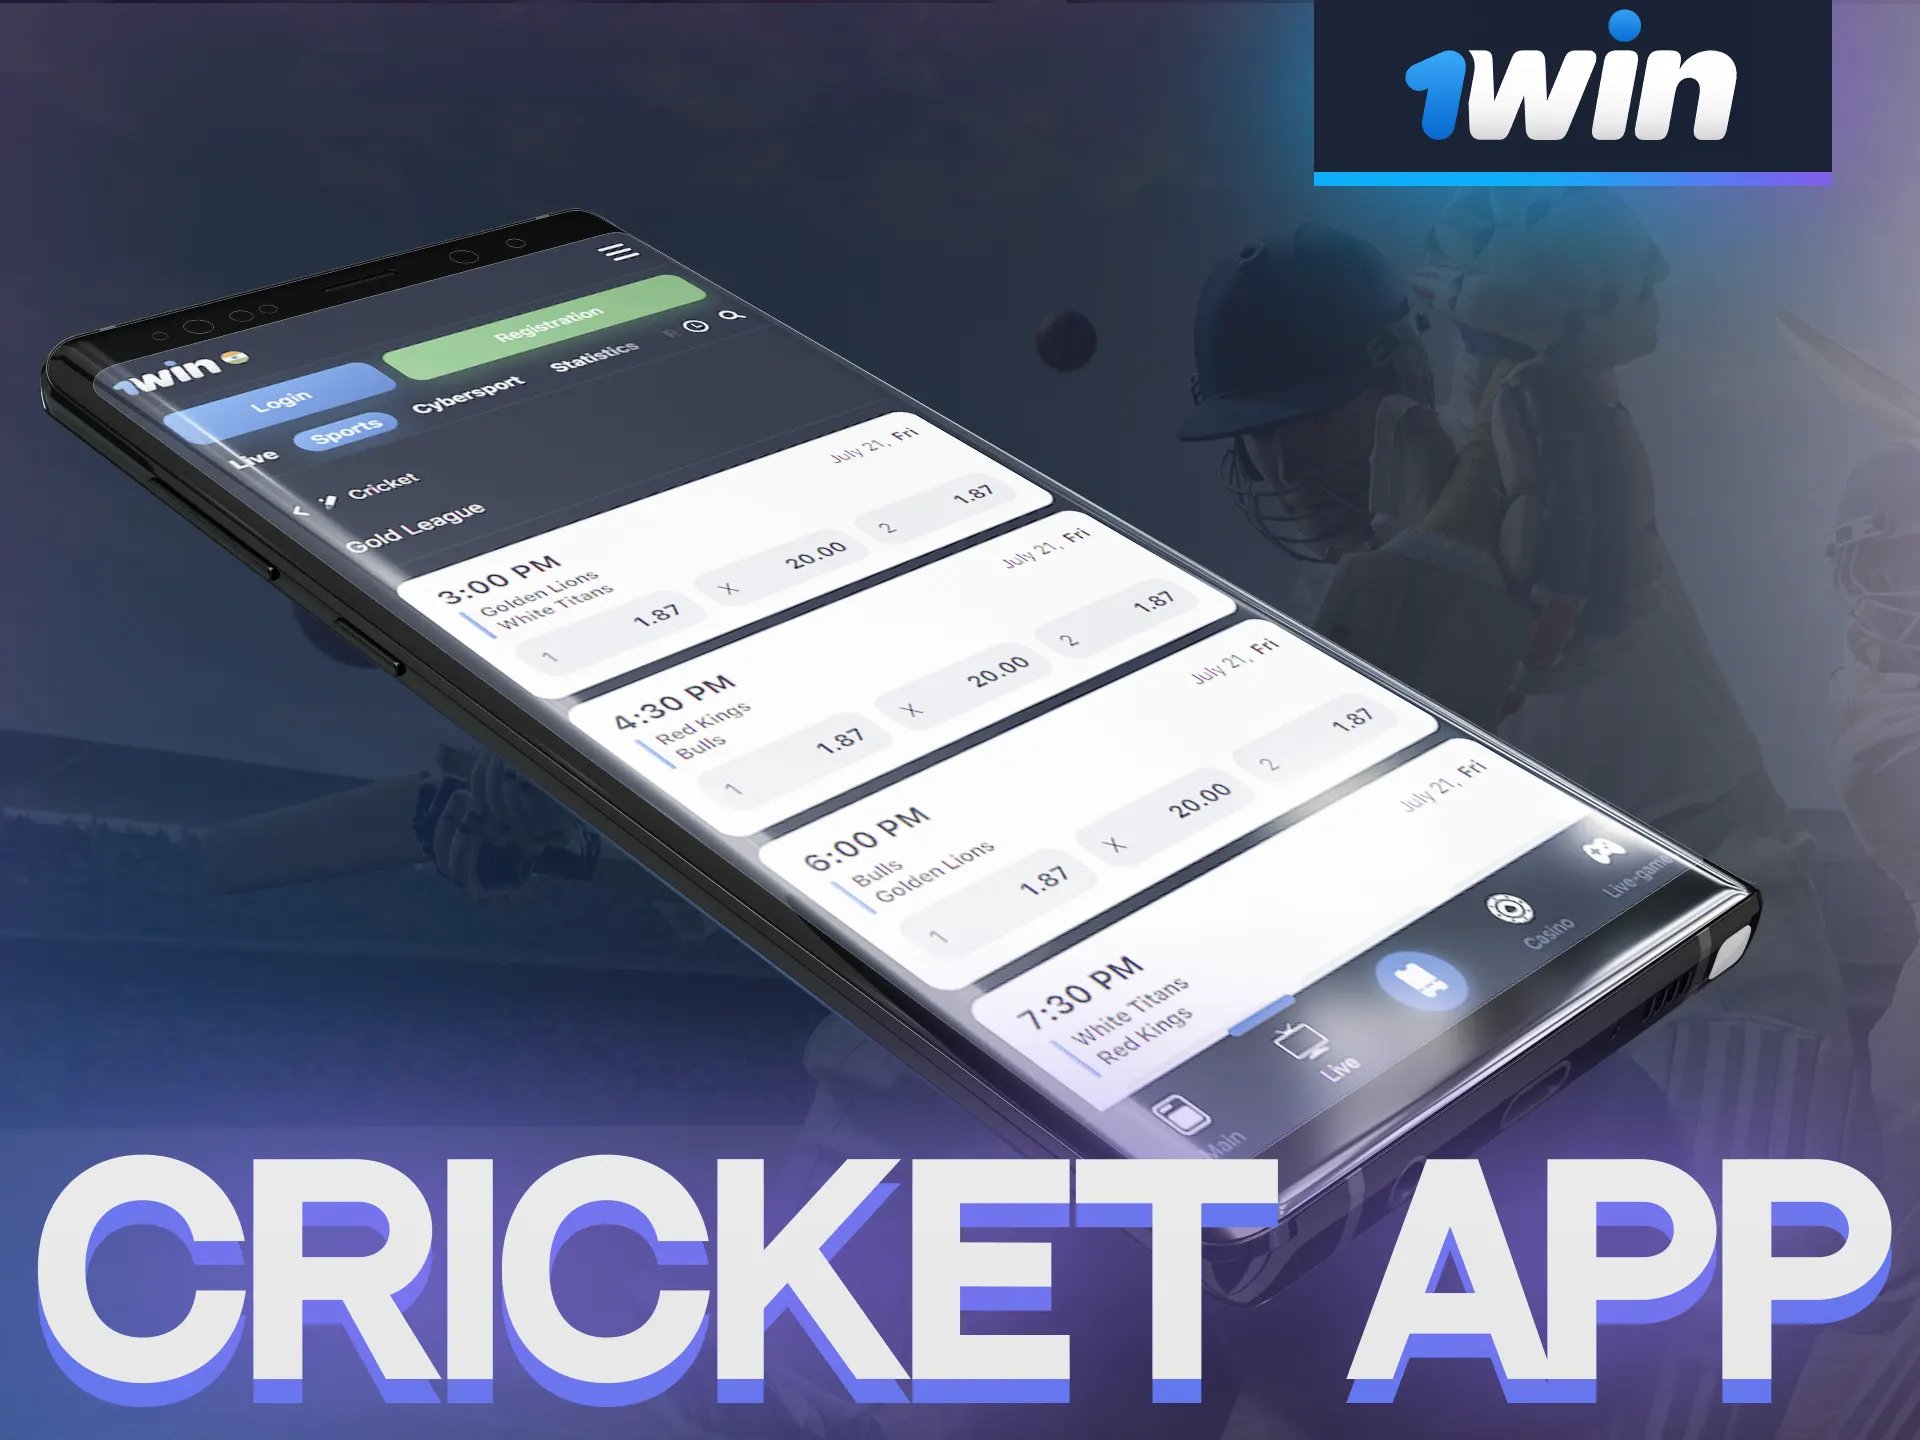 You can bet from your mobile device using the 1win app.